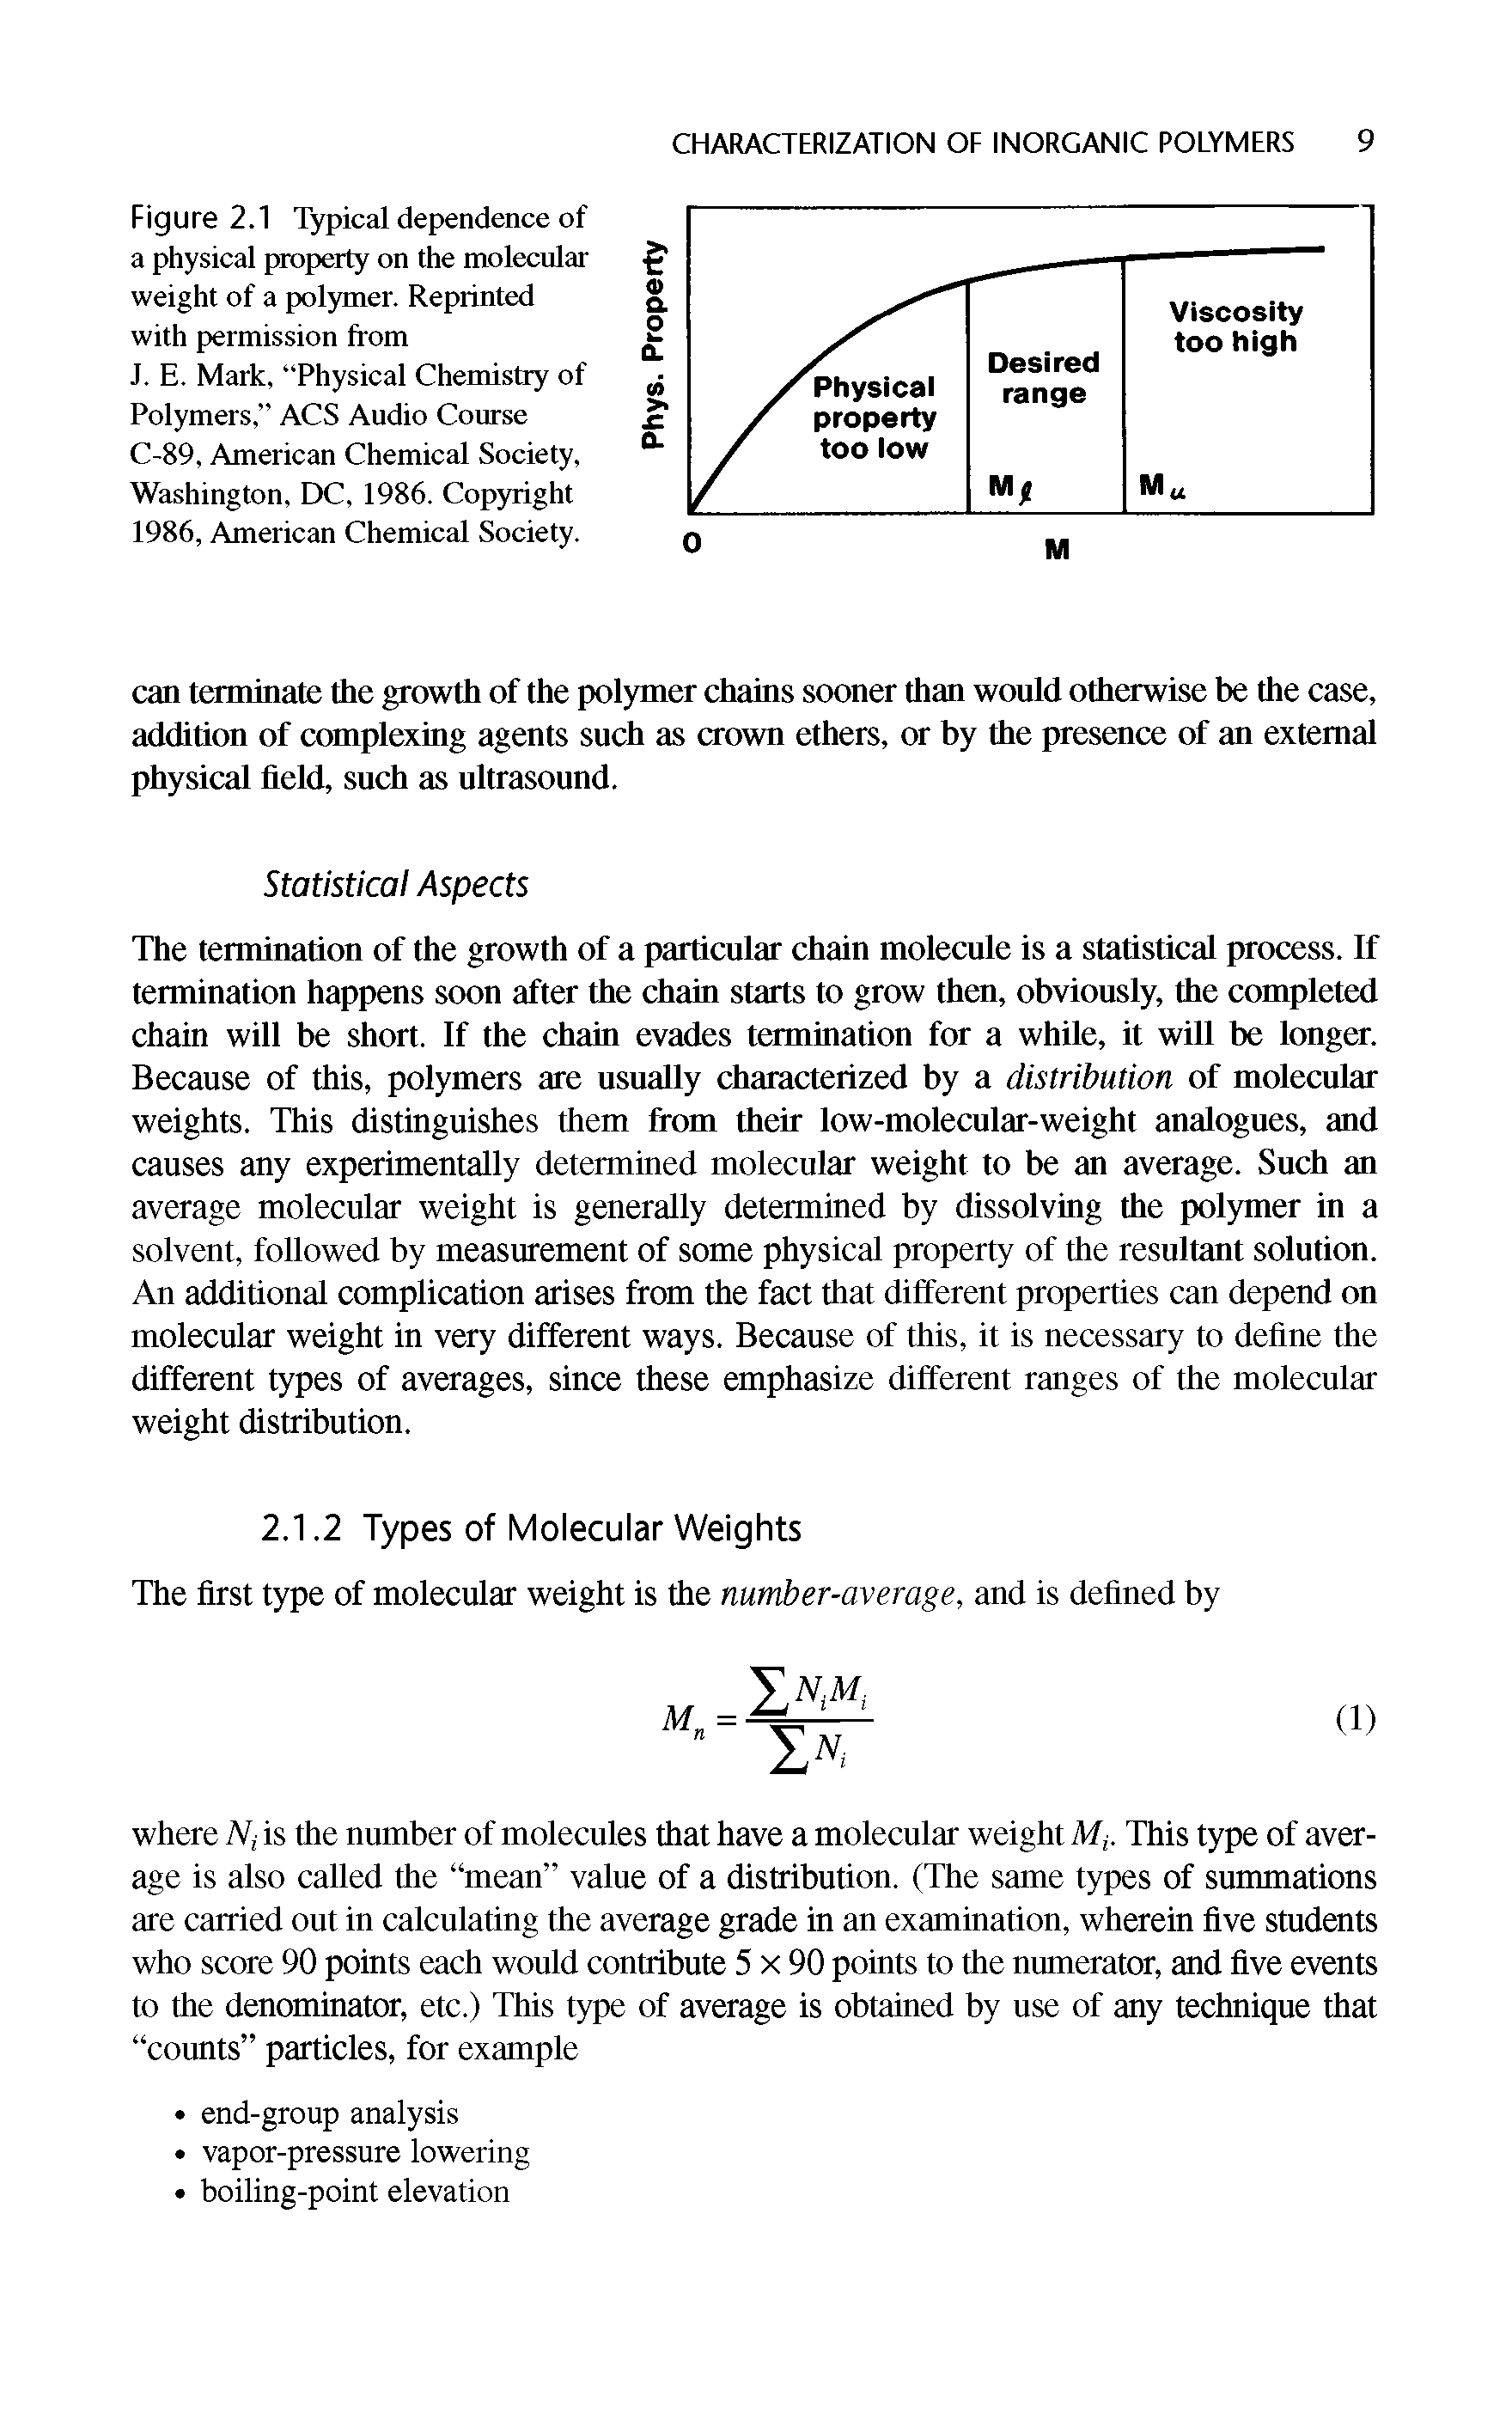 Figure 2.1 Typical dependence of a physical property on the molecular weight of a polymer. Reprinted with permission from J. E. Mark, Physical Chemistry of Polymers, ACS Audio Course C-89, American Chemical Society, Washington, DC, 1986. Copyright 1986, American Chemical Society.